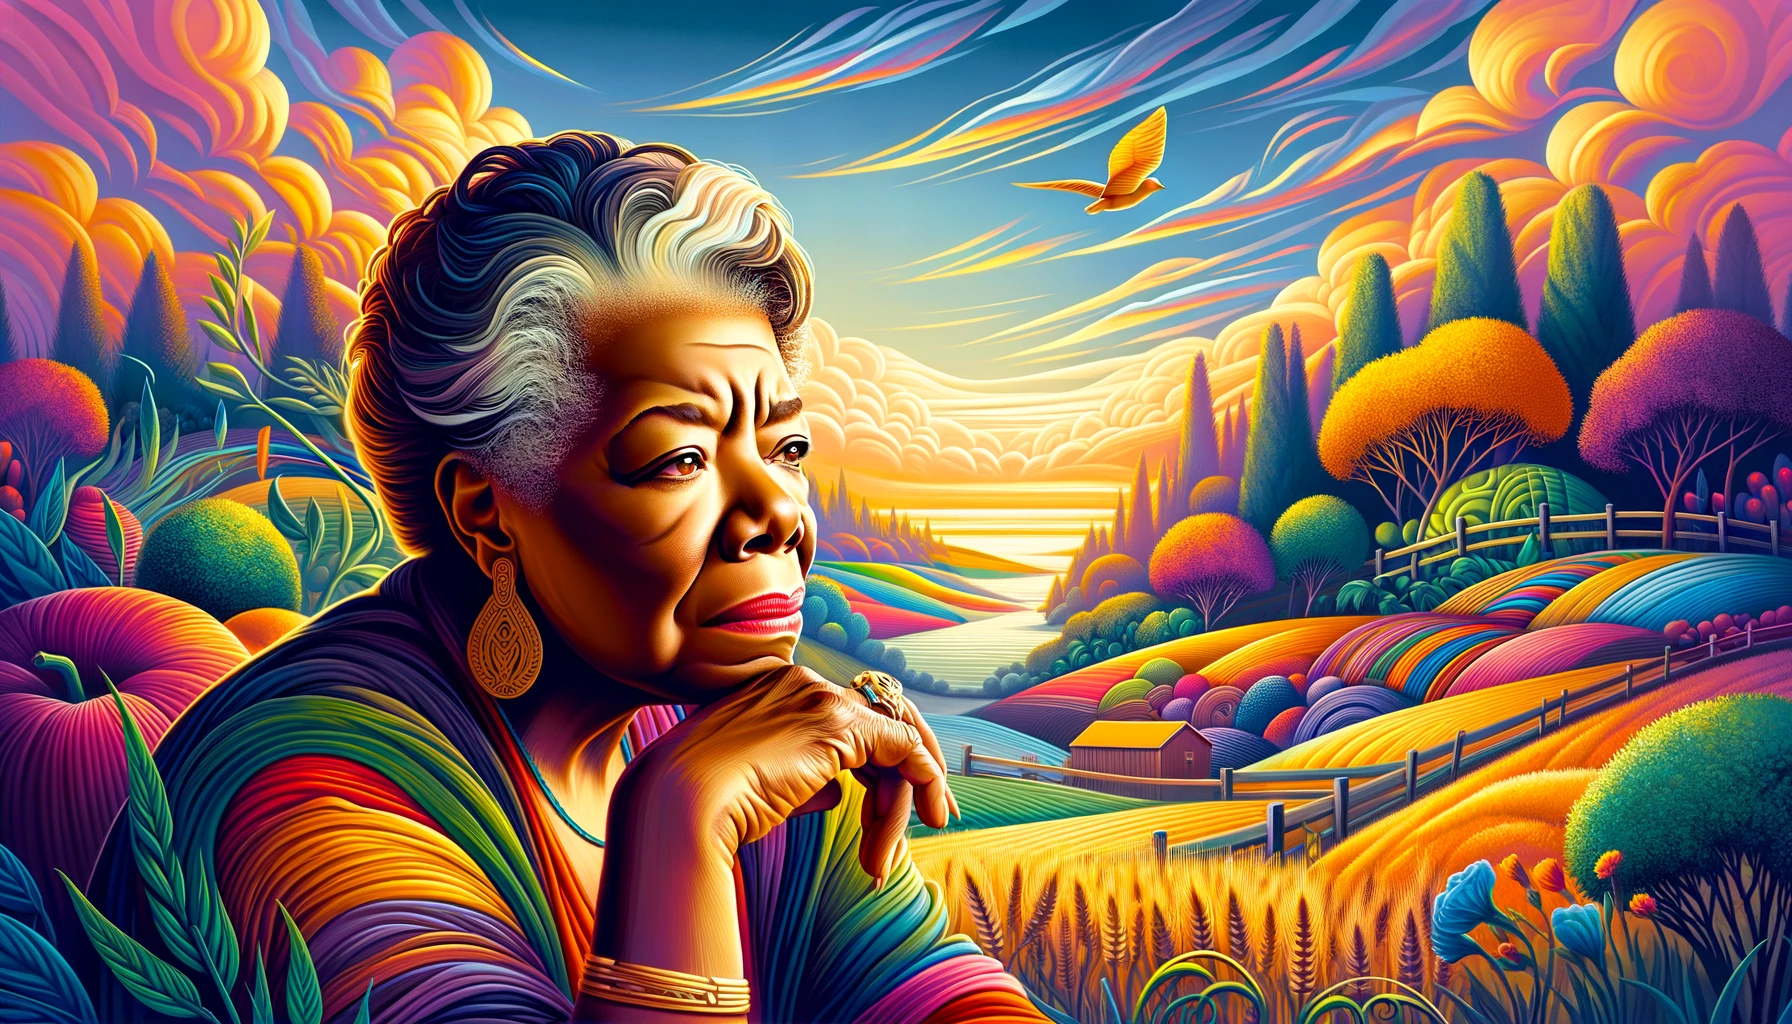 Colorful and artistic image featuring Maya Angelou The image portrays her in a thoughtful and wise manner